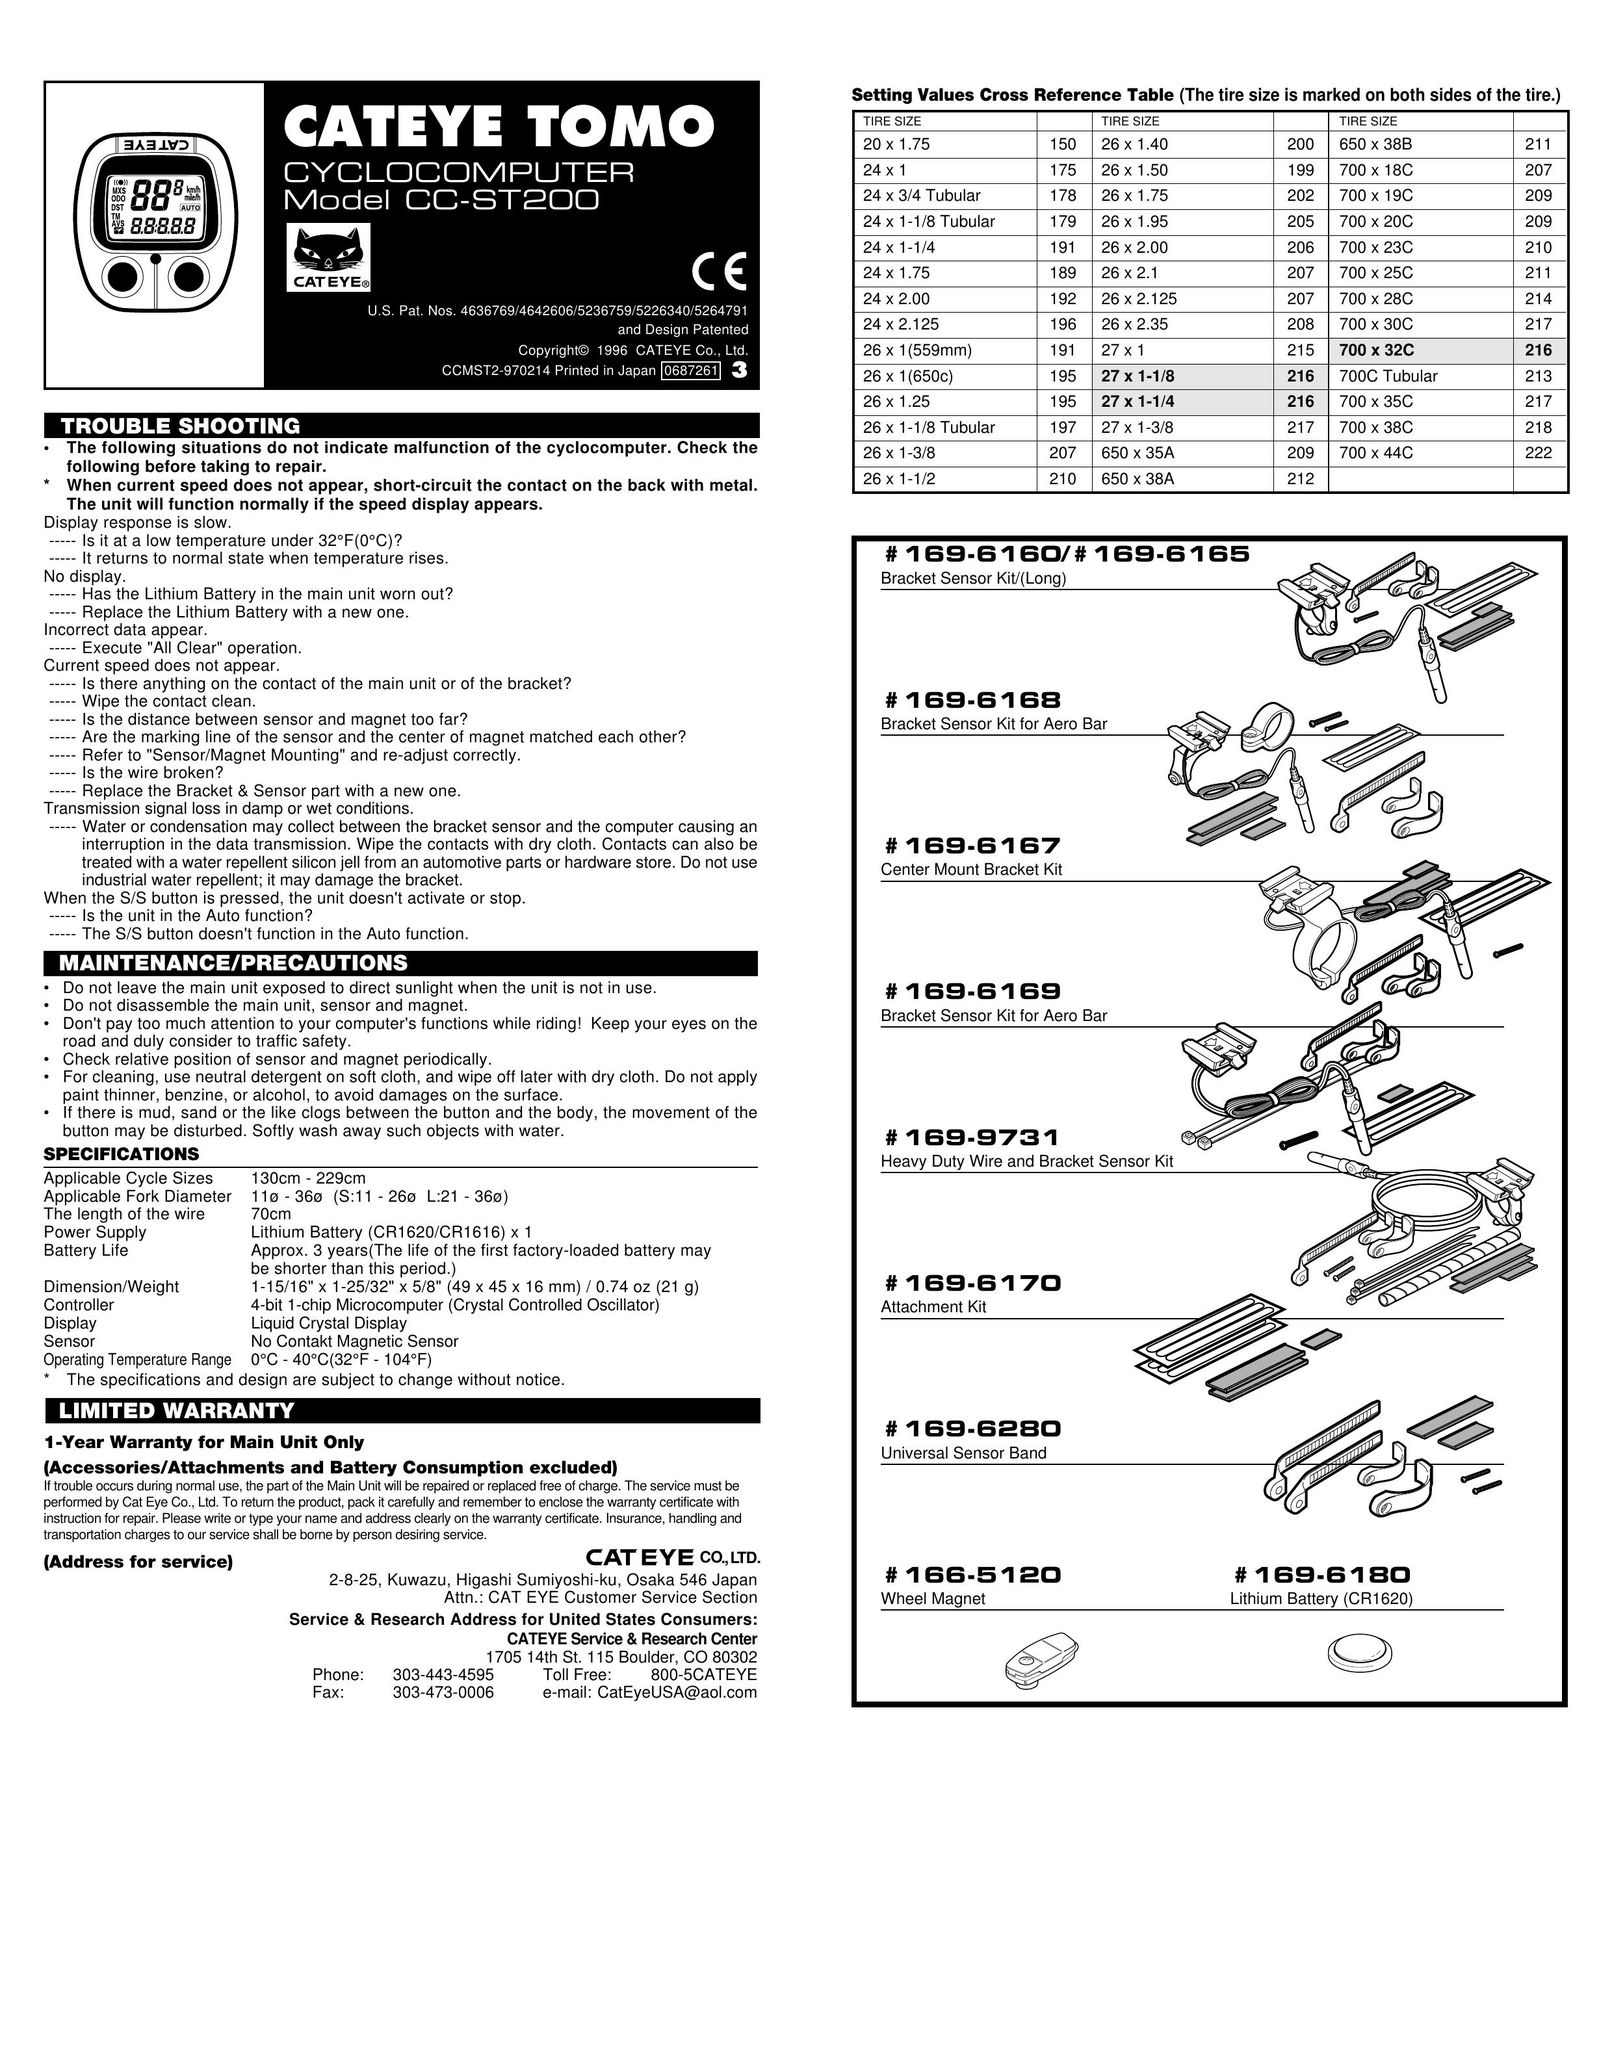 Cateye CC ST-200 Bicycle User Manual (Page 1)